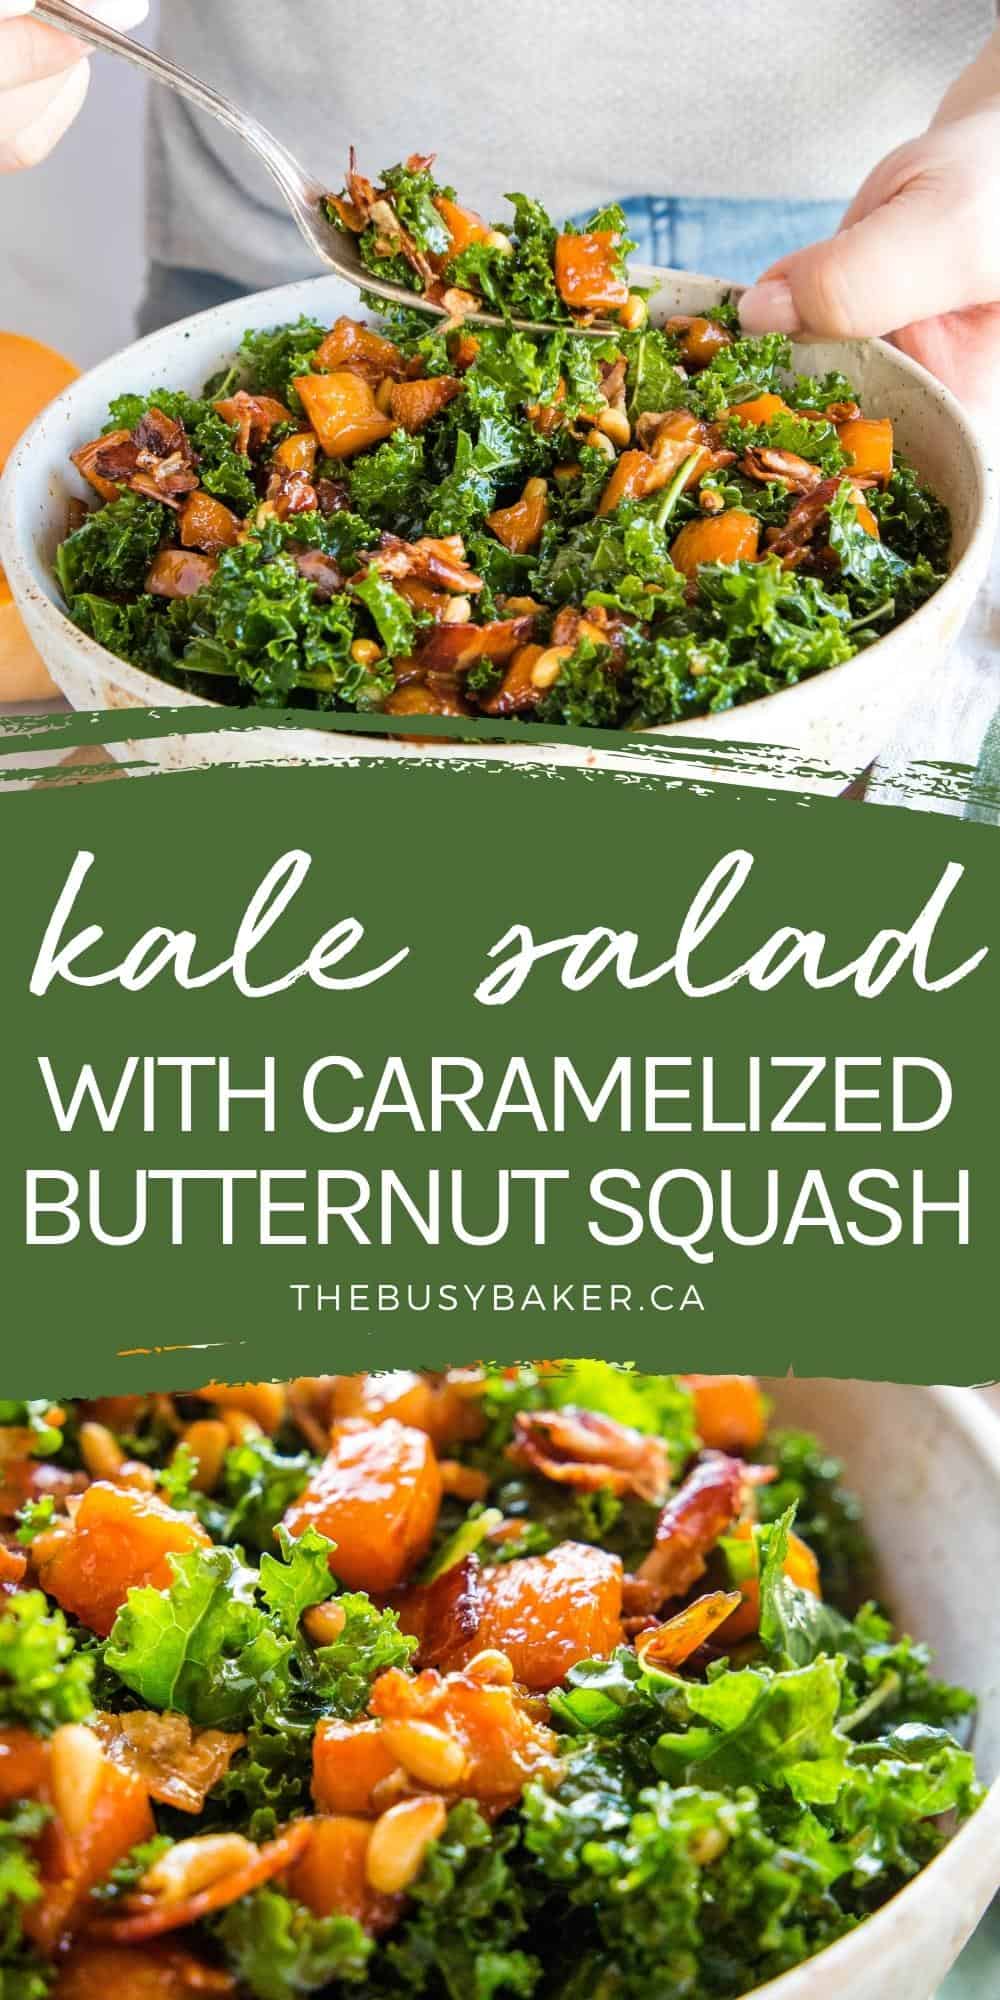 This Kale Salad with Butternut Squash is the perfect winter salad - maple syrup caramelized squash, salty bacon and crunchy pine nuts. Recipe from thebusybaker.ca! #kalesalad #kalebutternutsquashsalad #wintersalad #holidaysalad via @busybakerblog